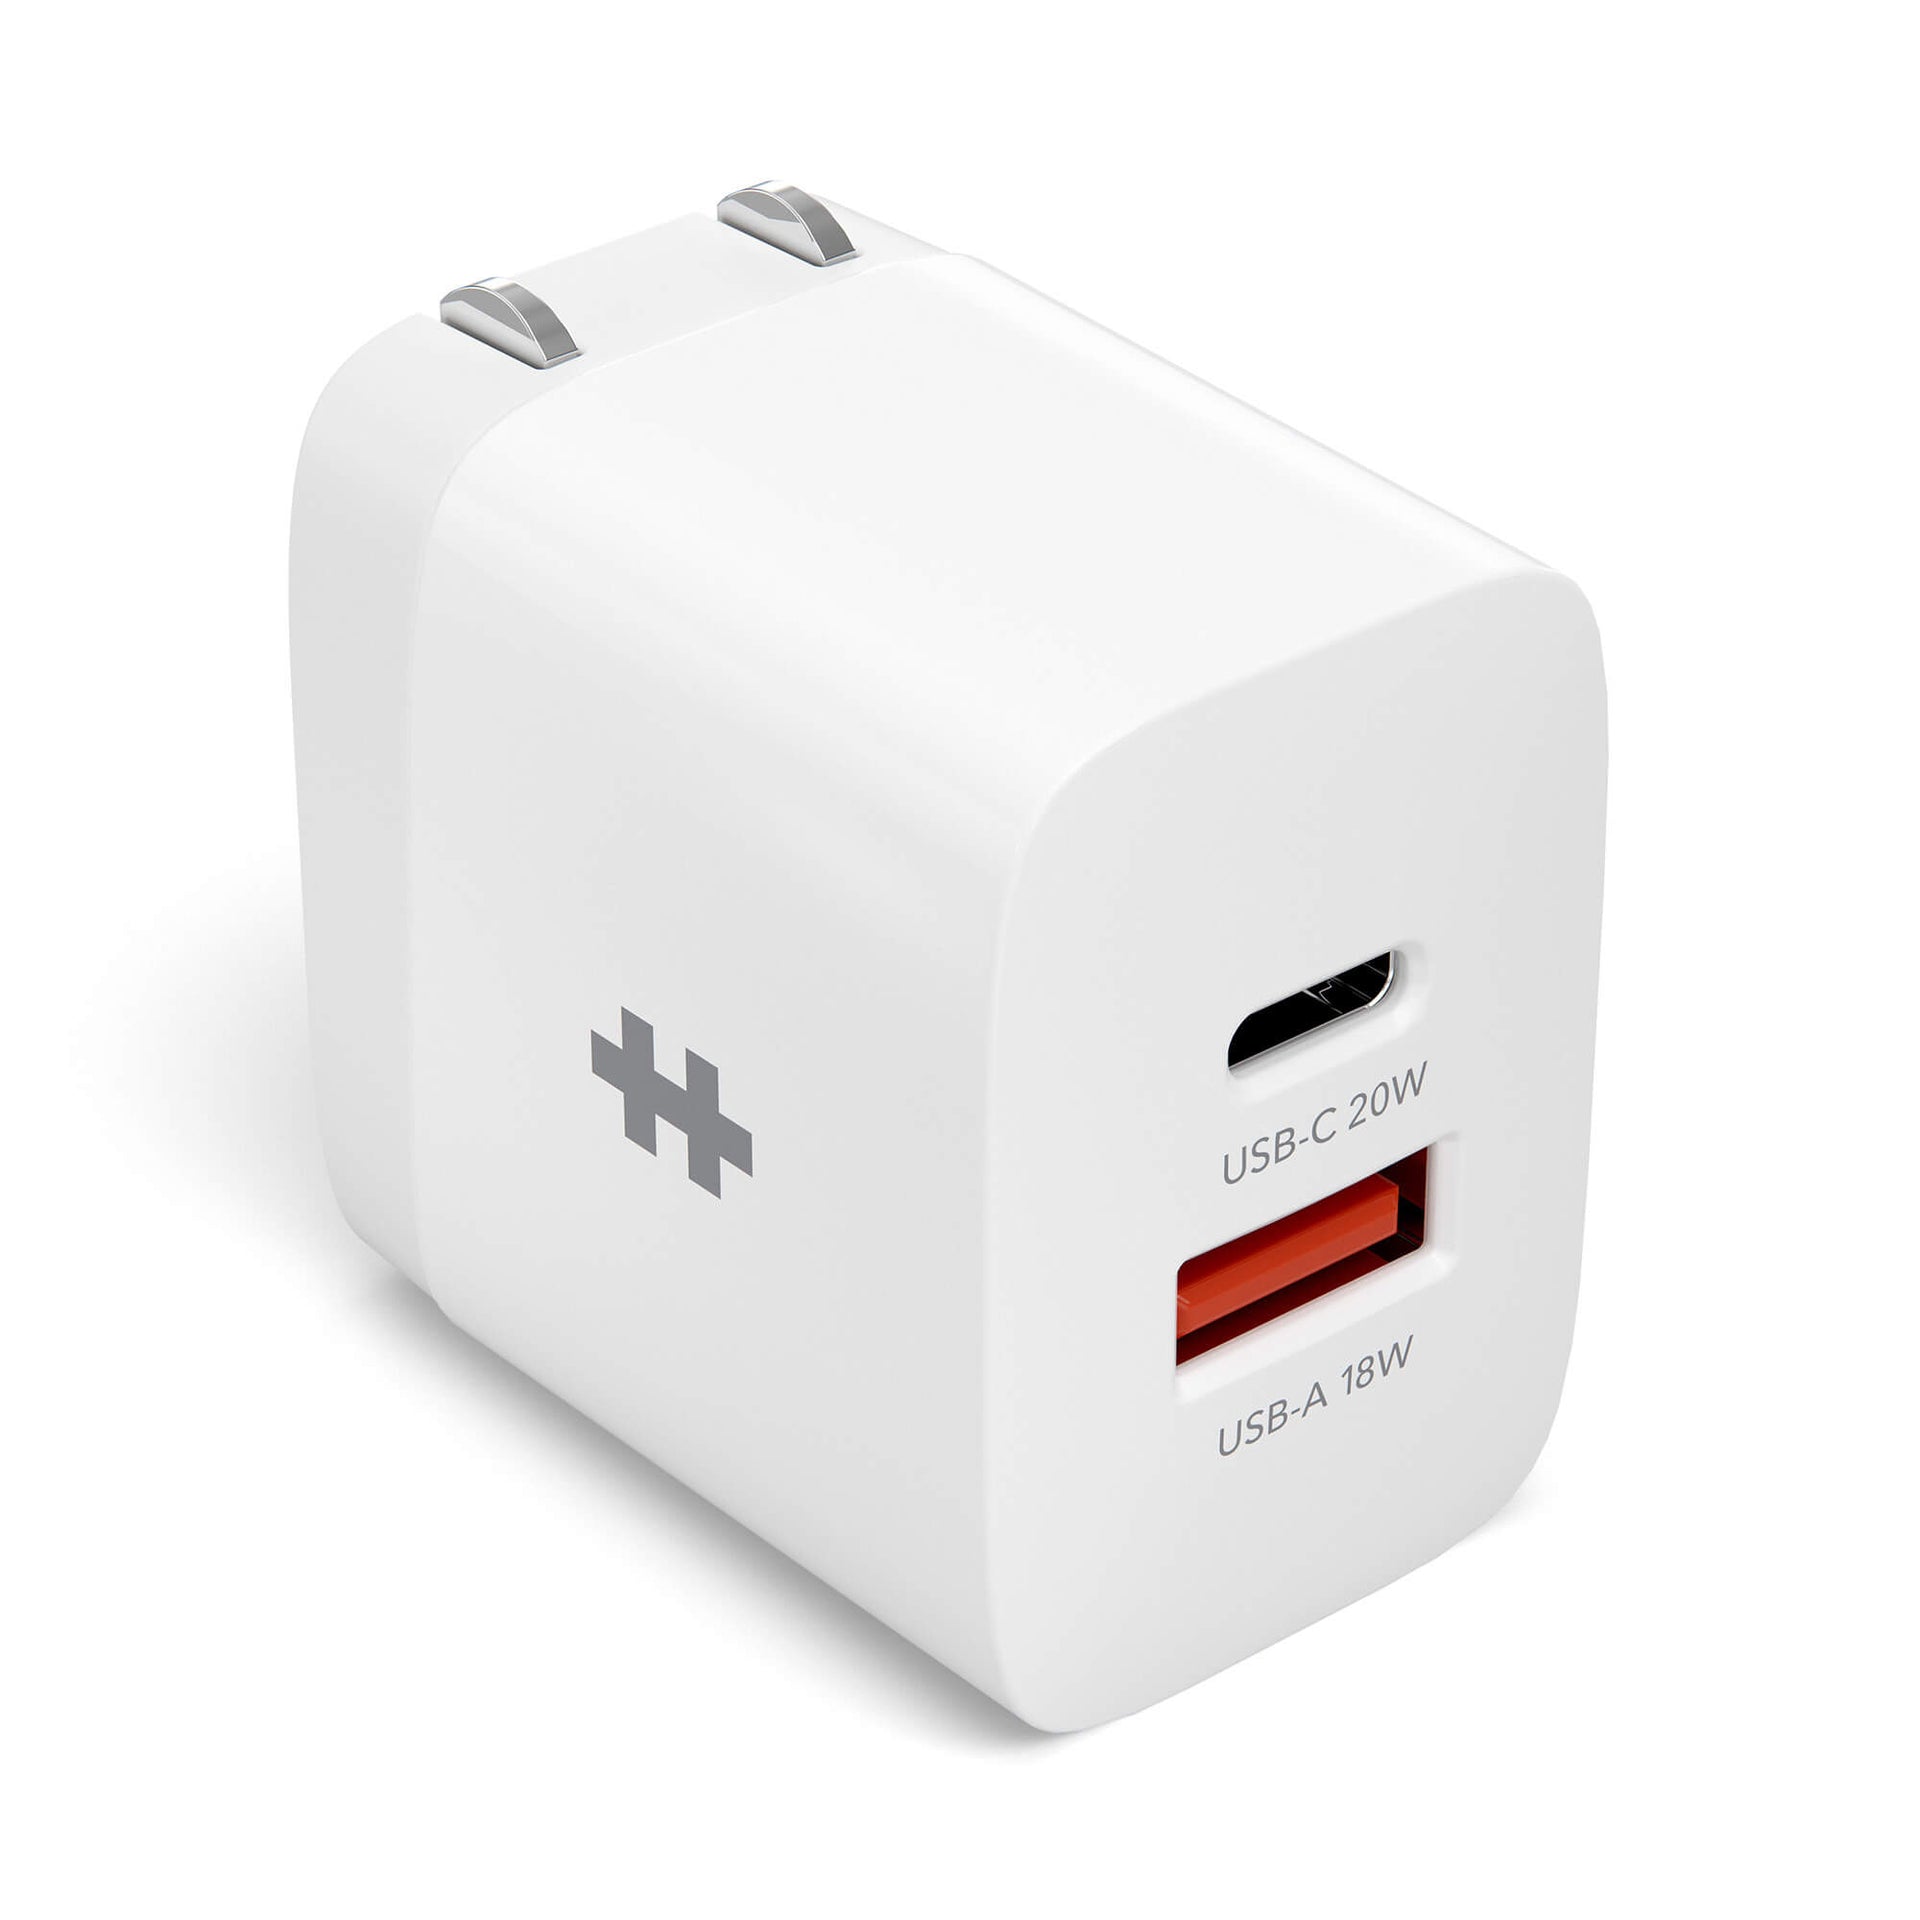 HyperJuice 20W USB-C Charger –